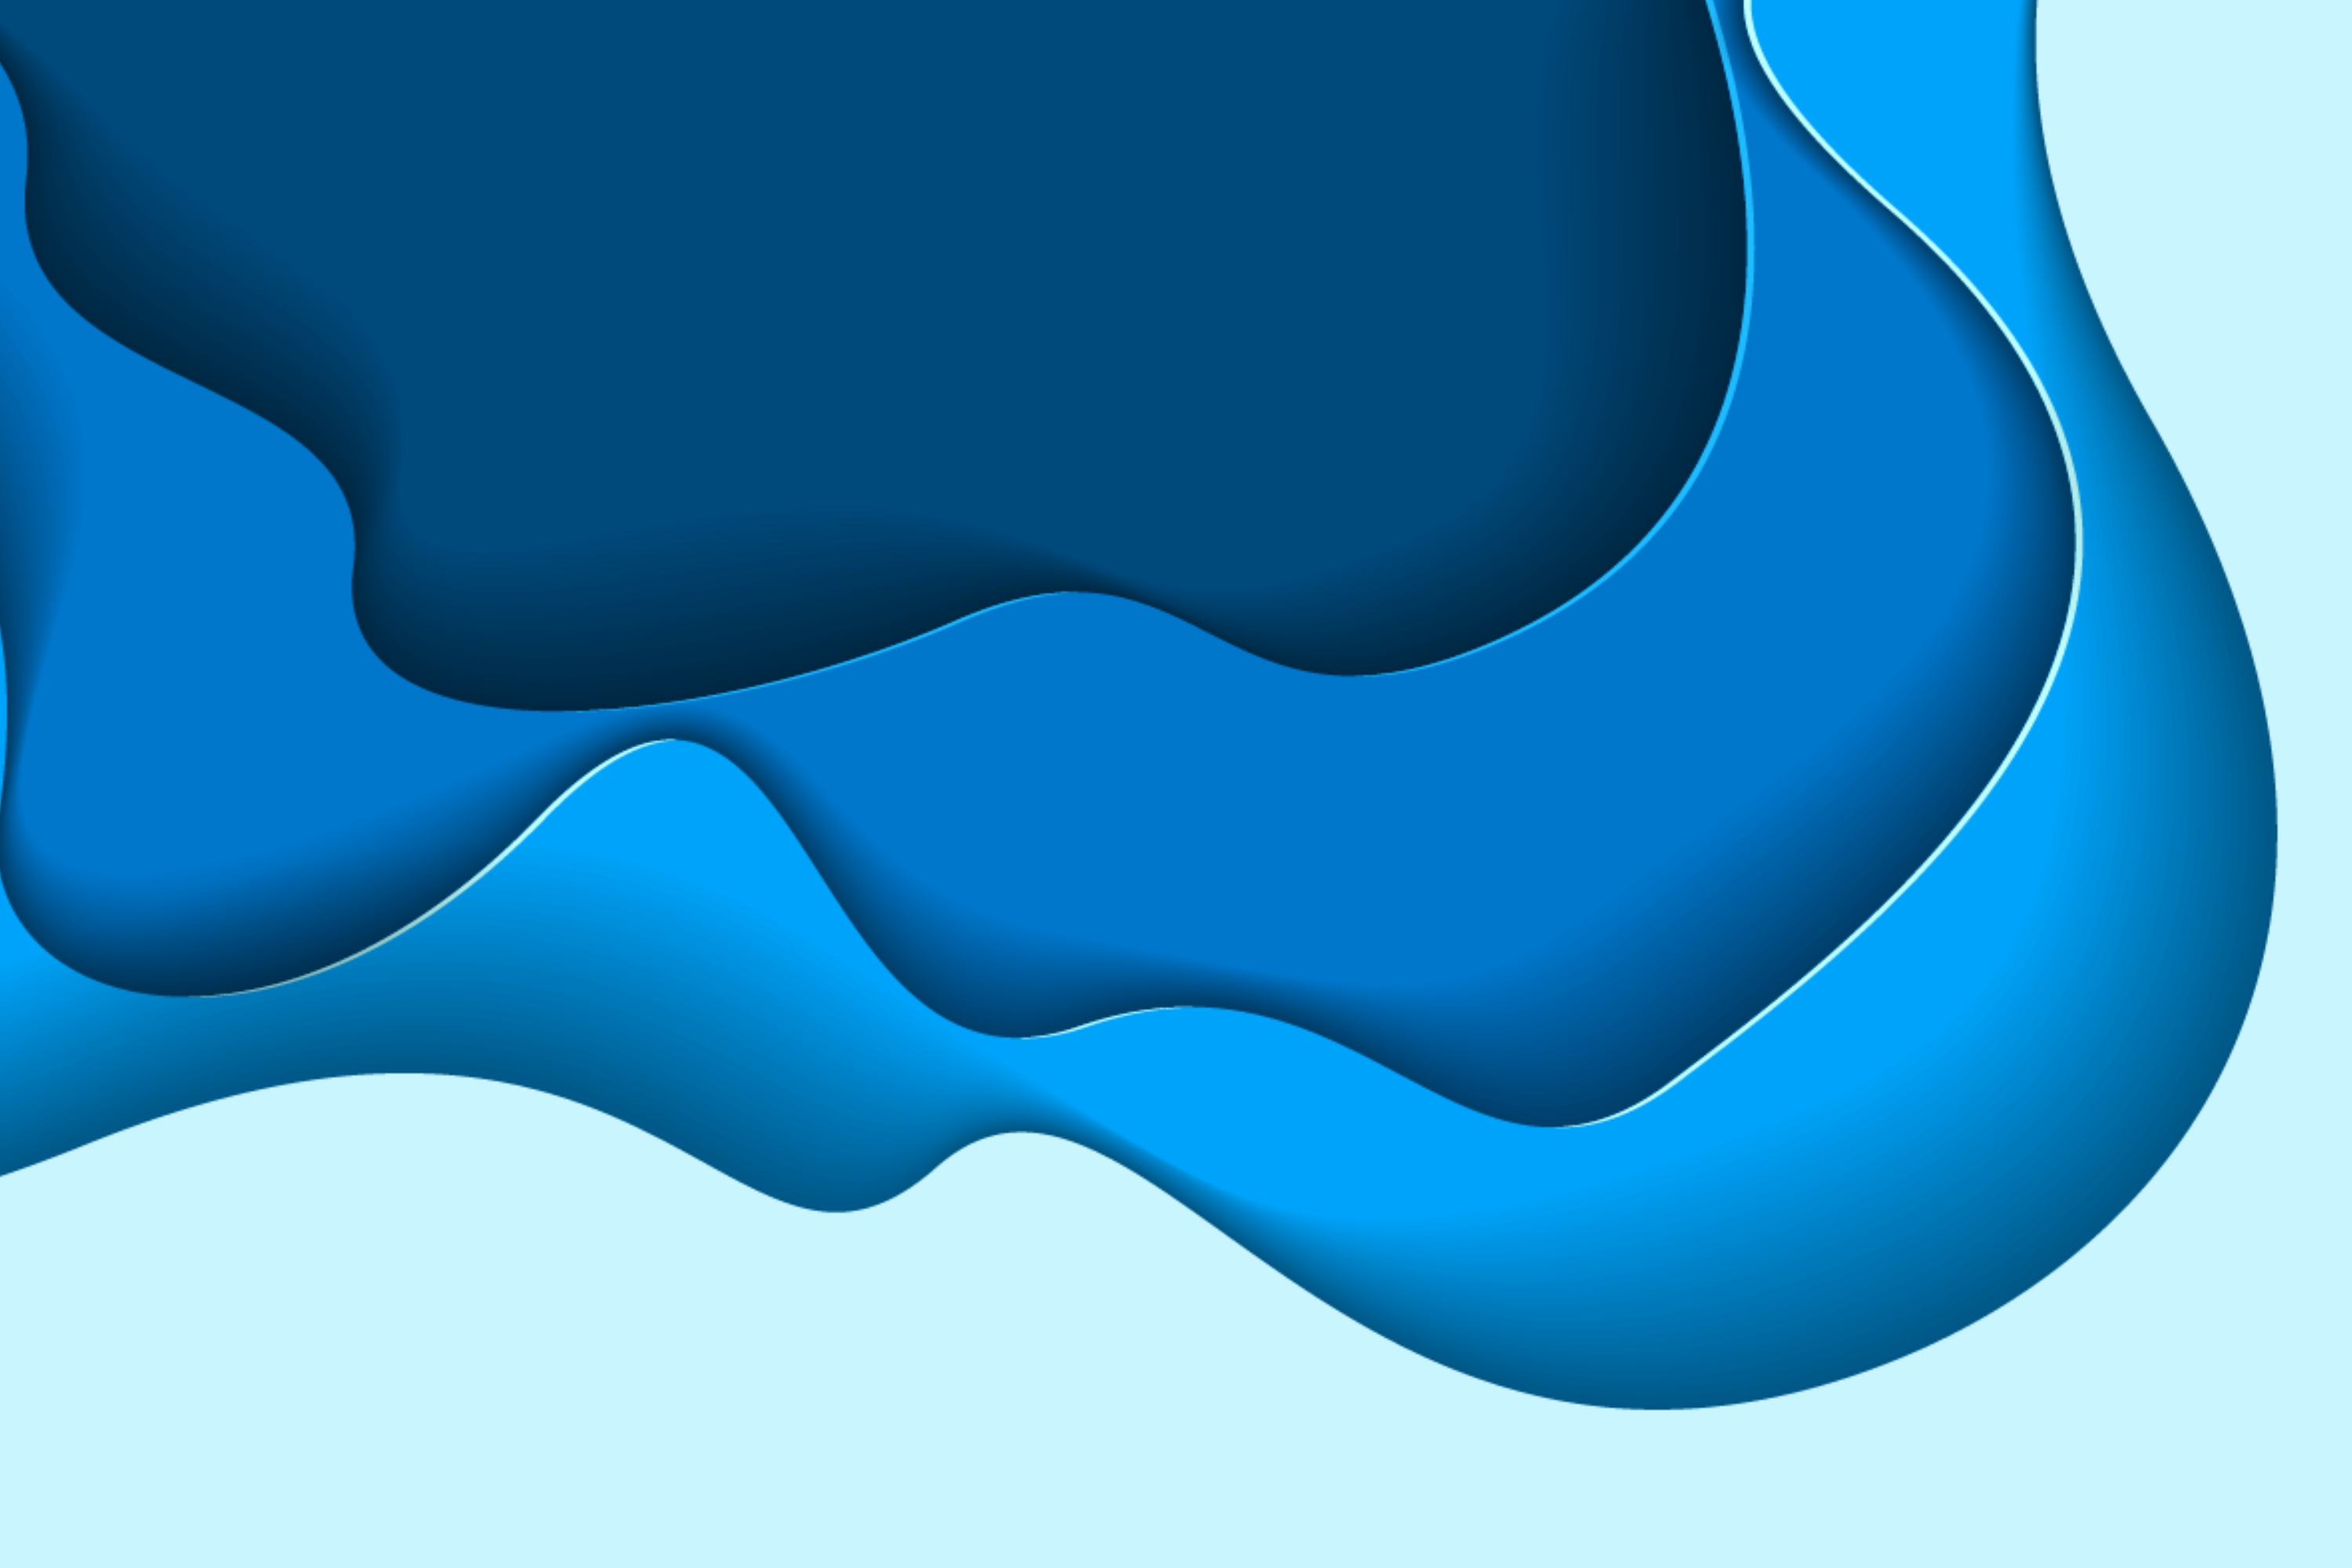 An abstract illustration revealing different layers of color. Swaths of blue, undulating shapes meet and overlap.